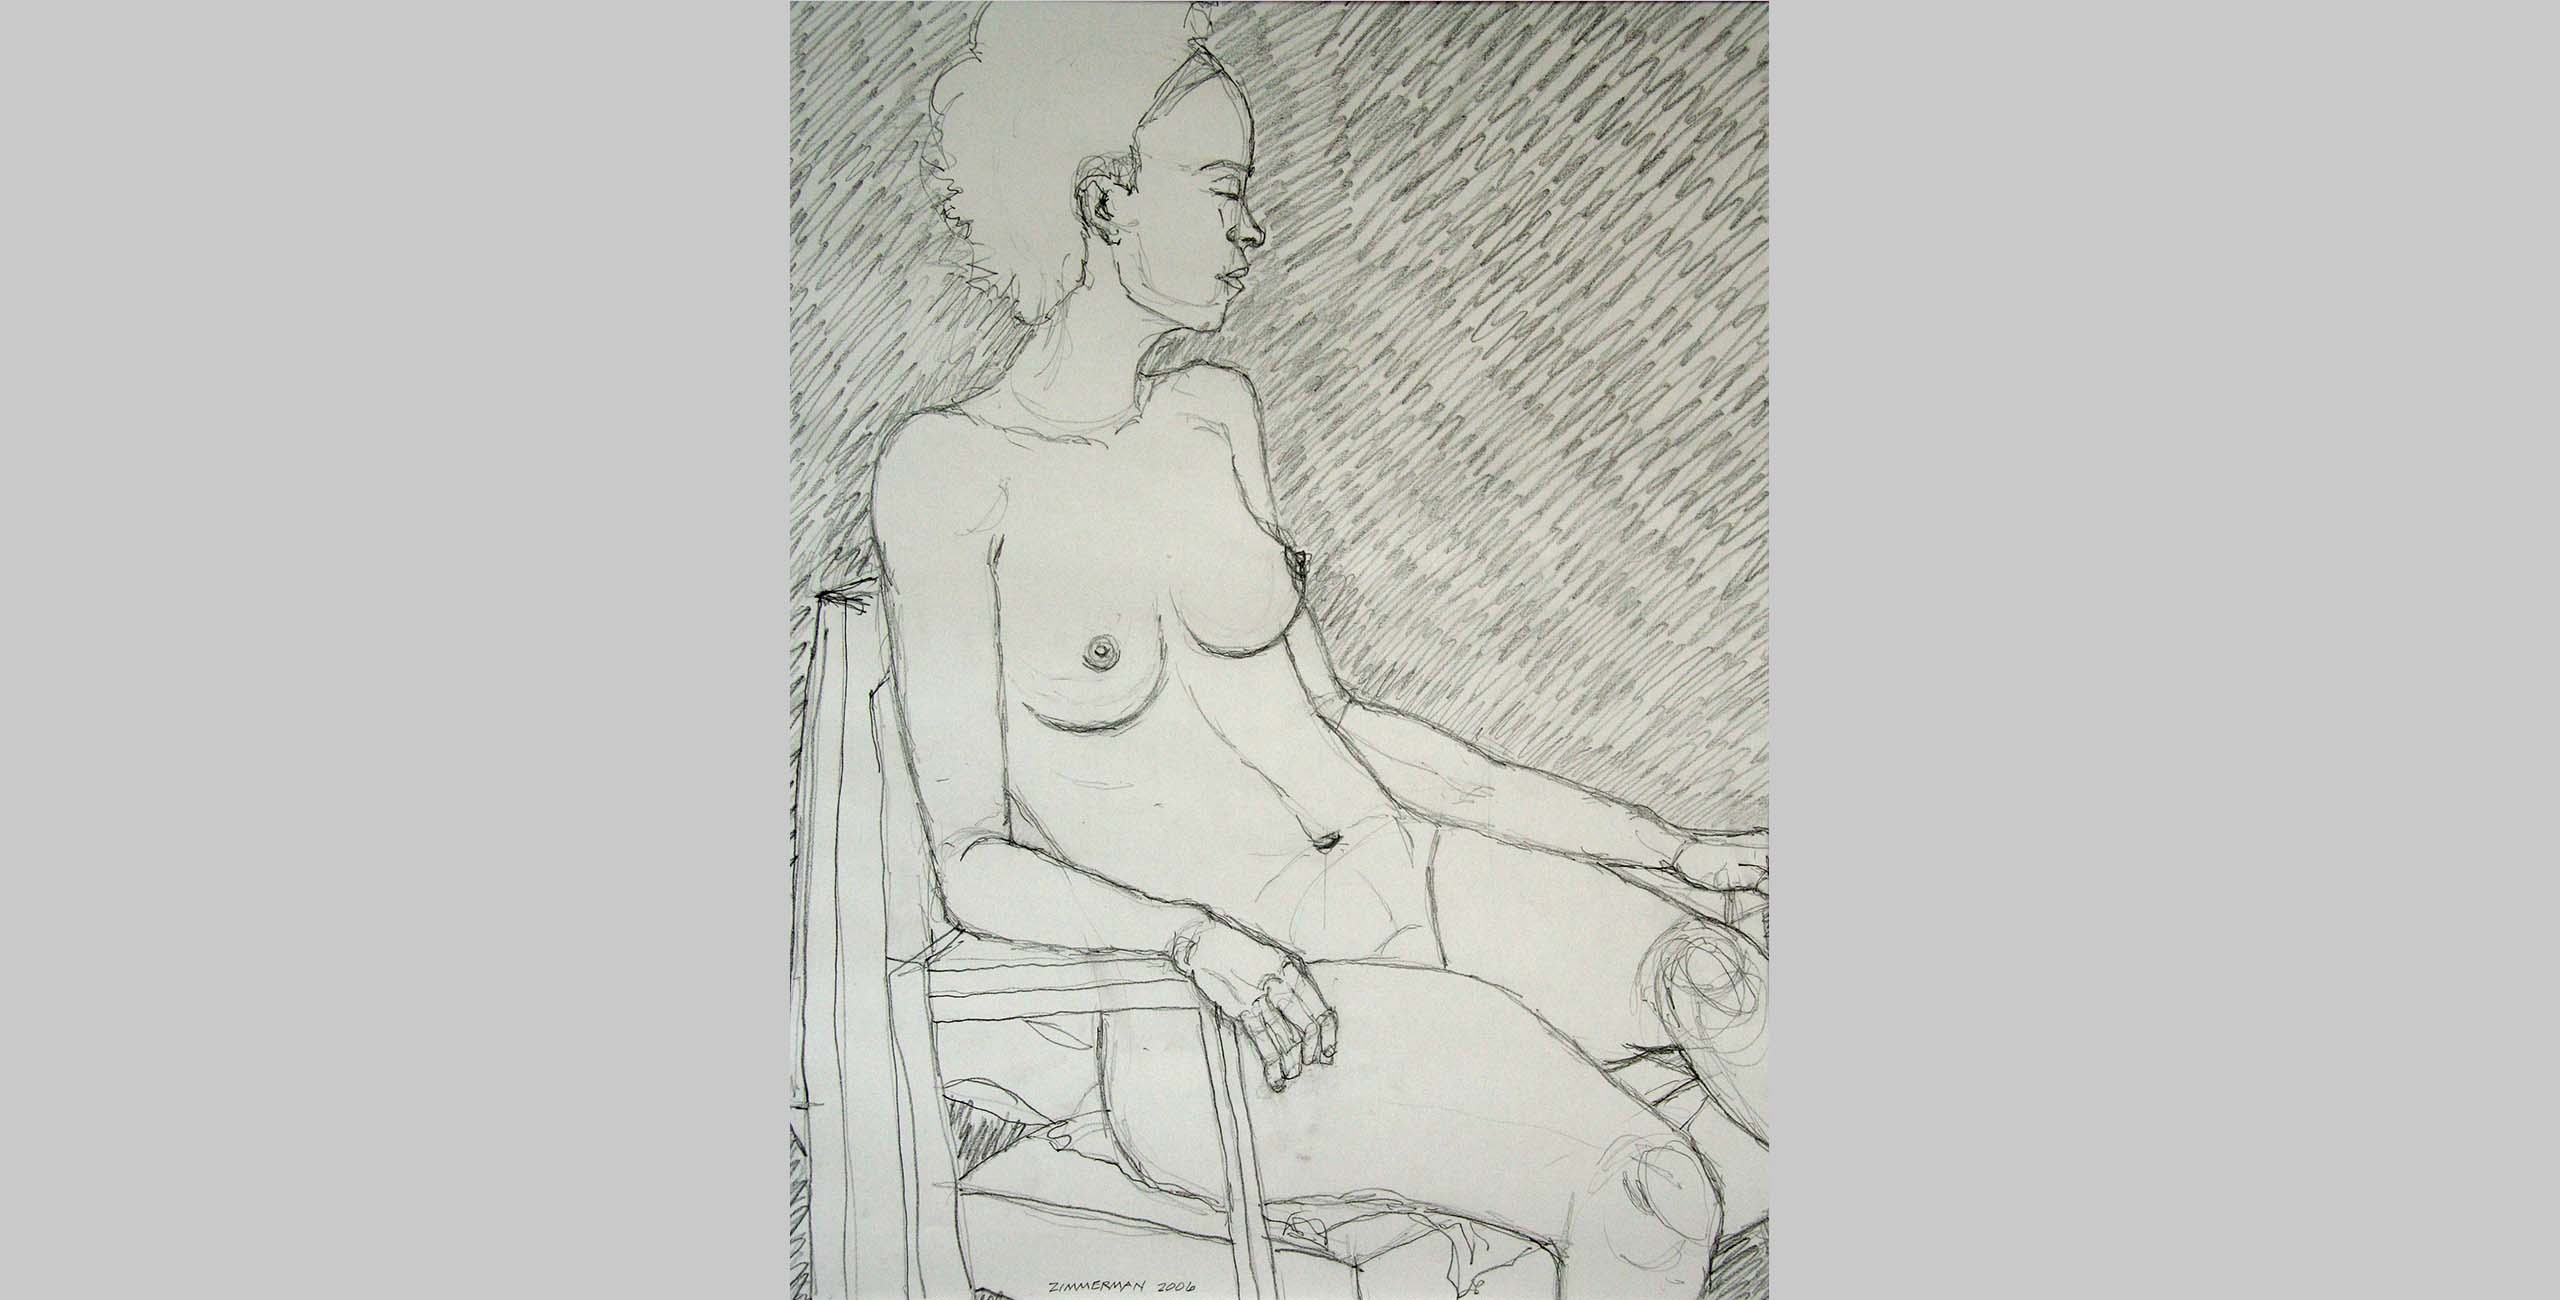 Seated Nude, 2006, graphite on paper, 14 x 18 in.